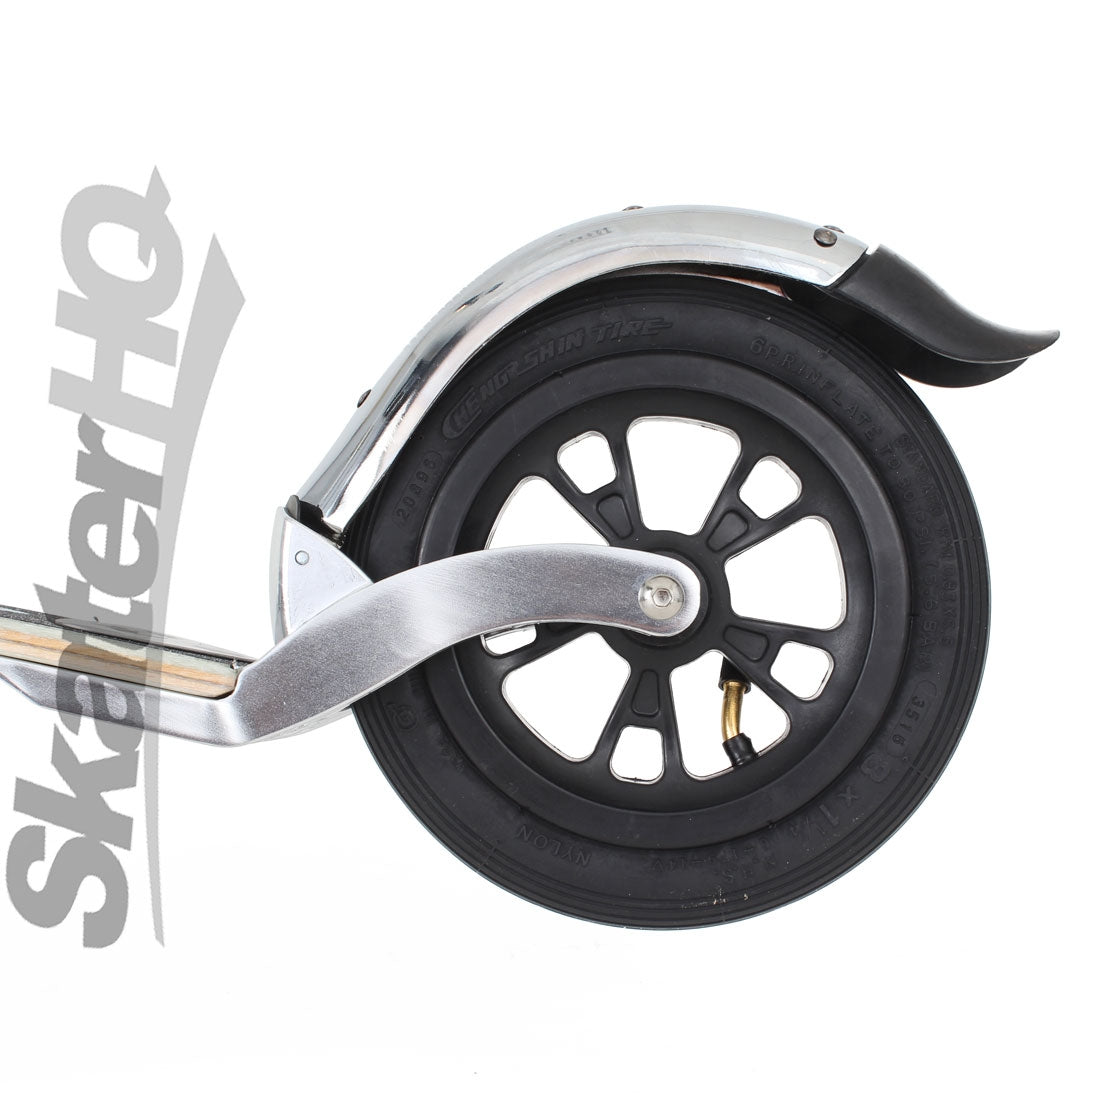 Micro Flex Air Scooter - Silver Scooter Completes Rec